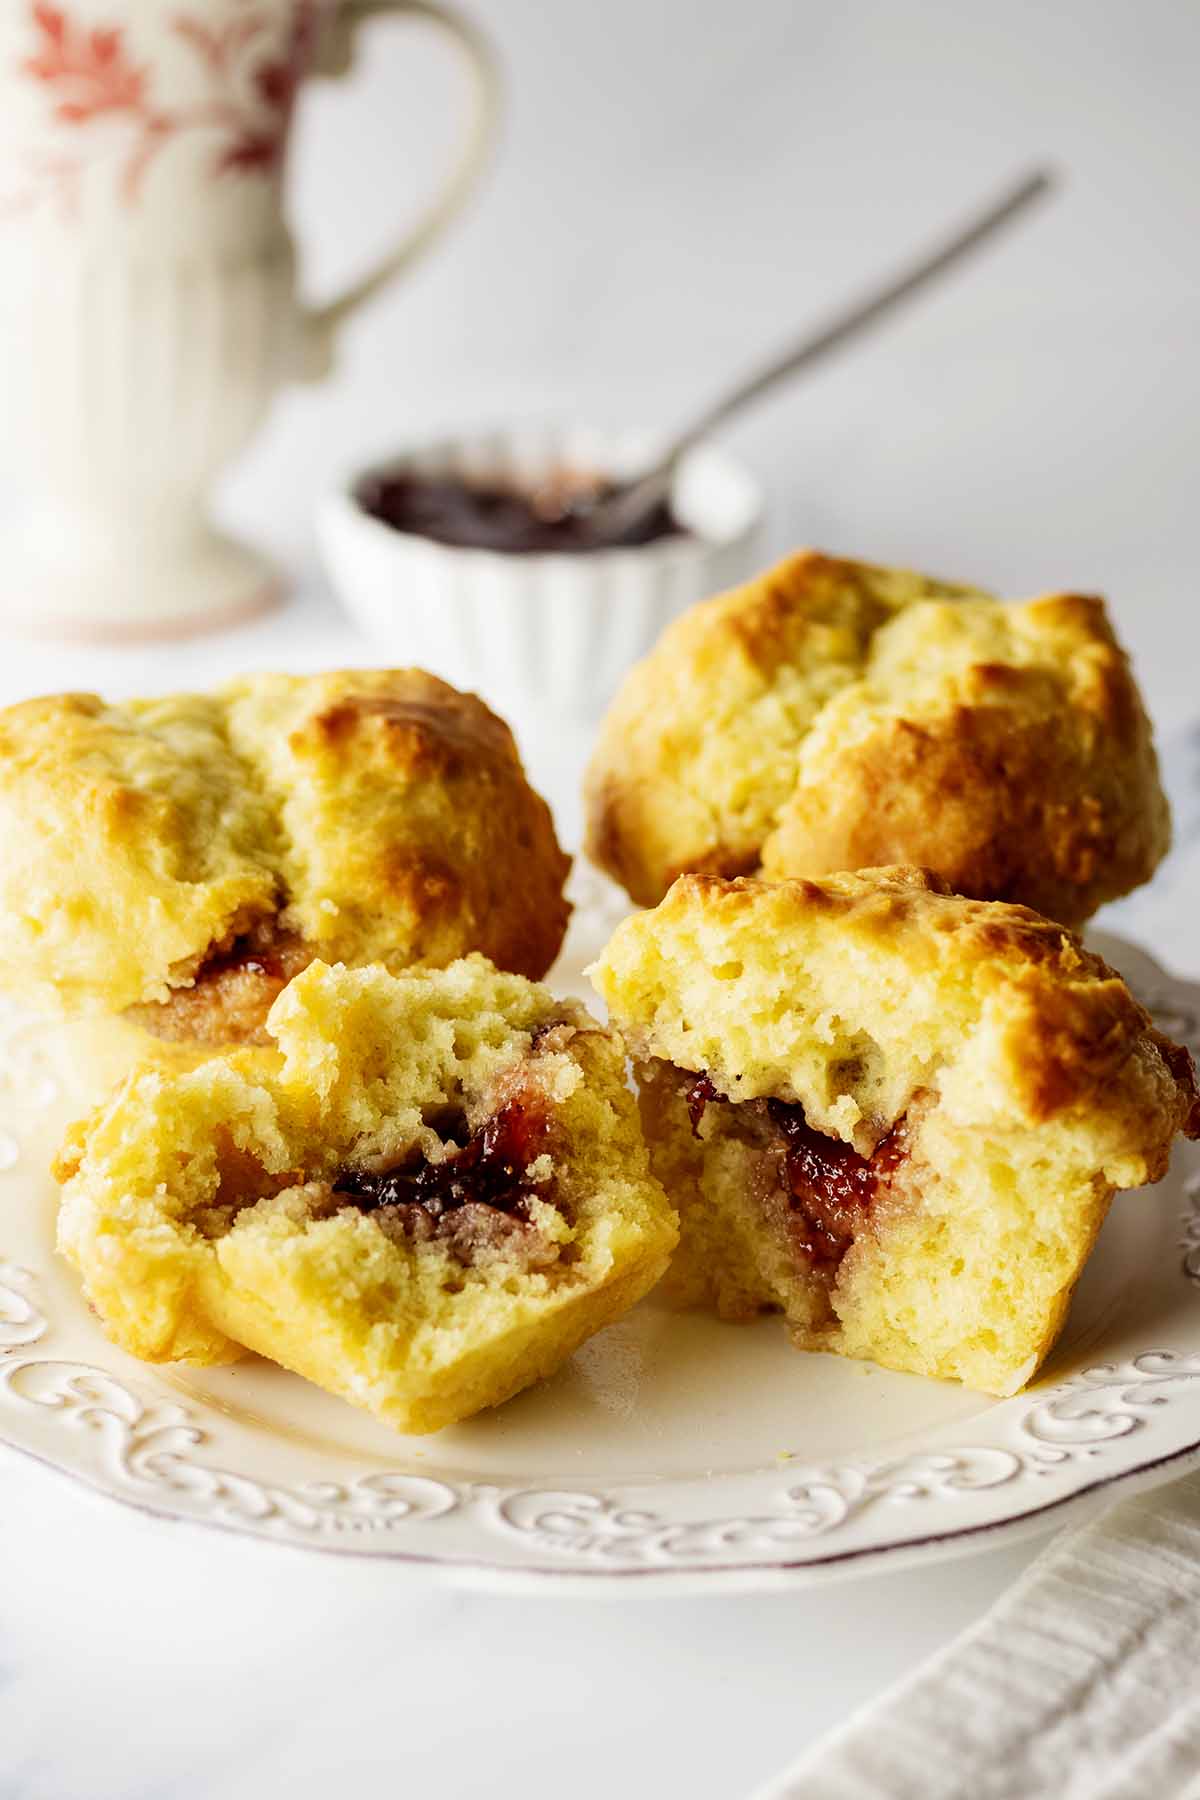 Three biscuit muffins on a white plate with one cut in half exposing the jam inside